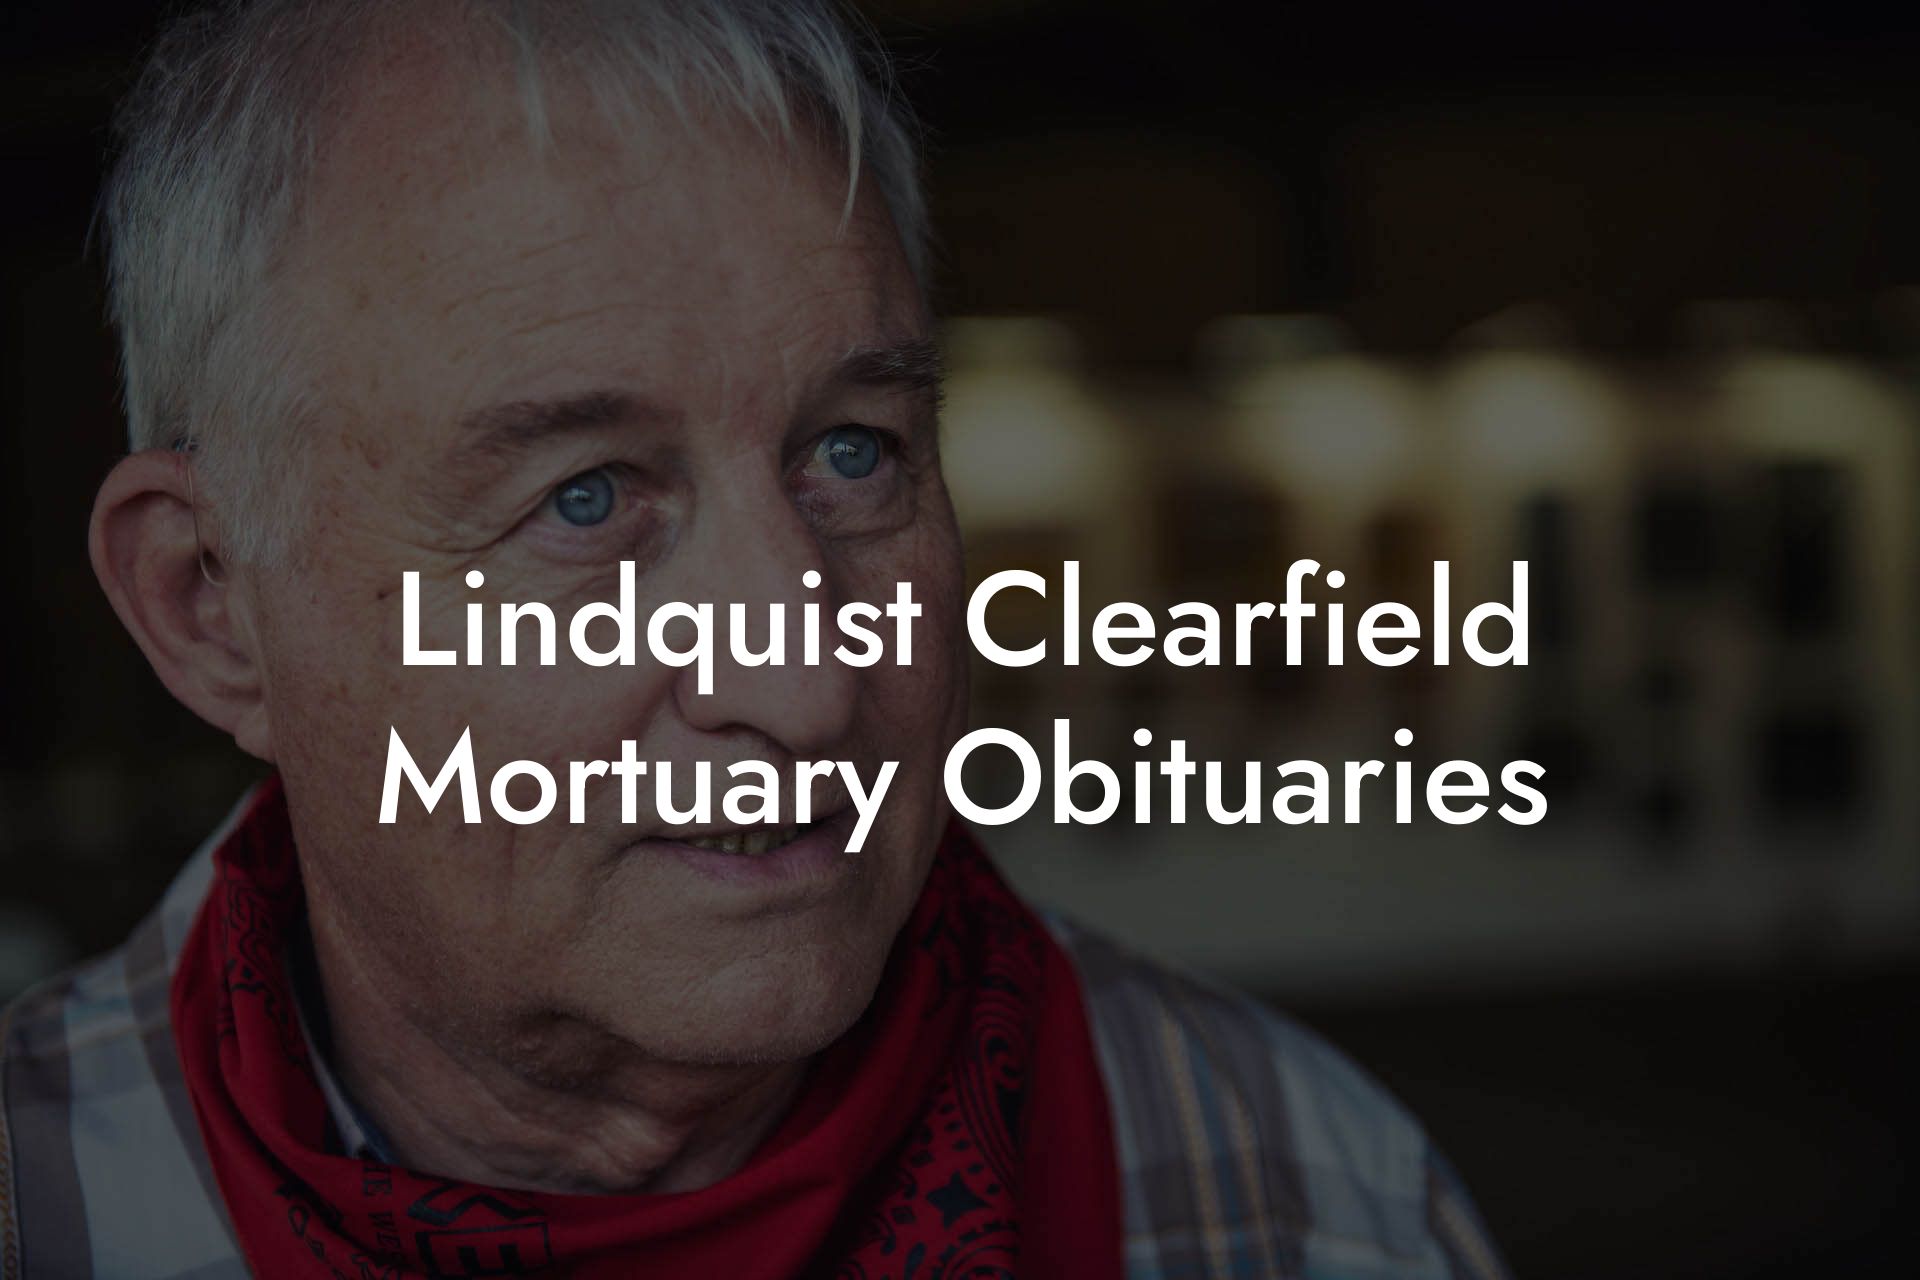 Lindquist Clearfield Mortuary Obituaries